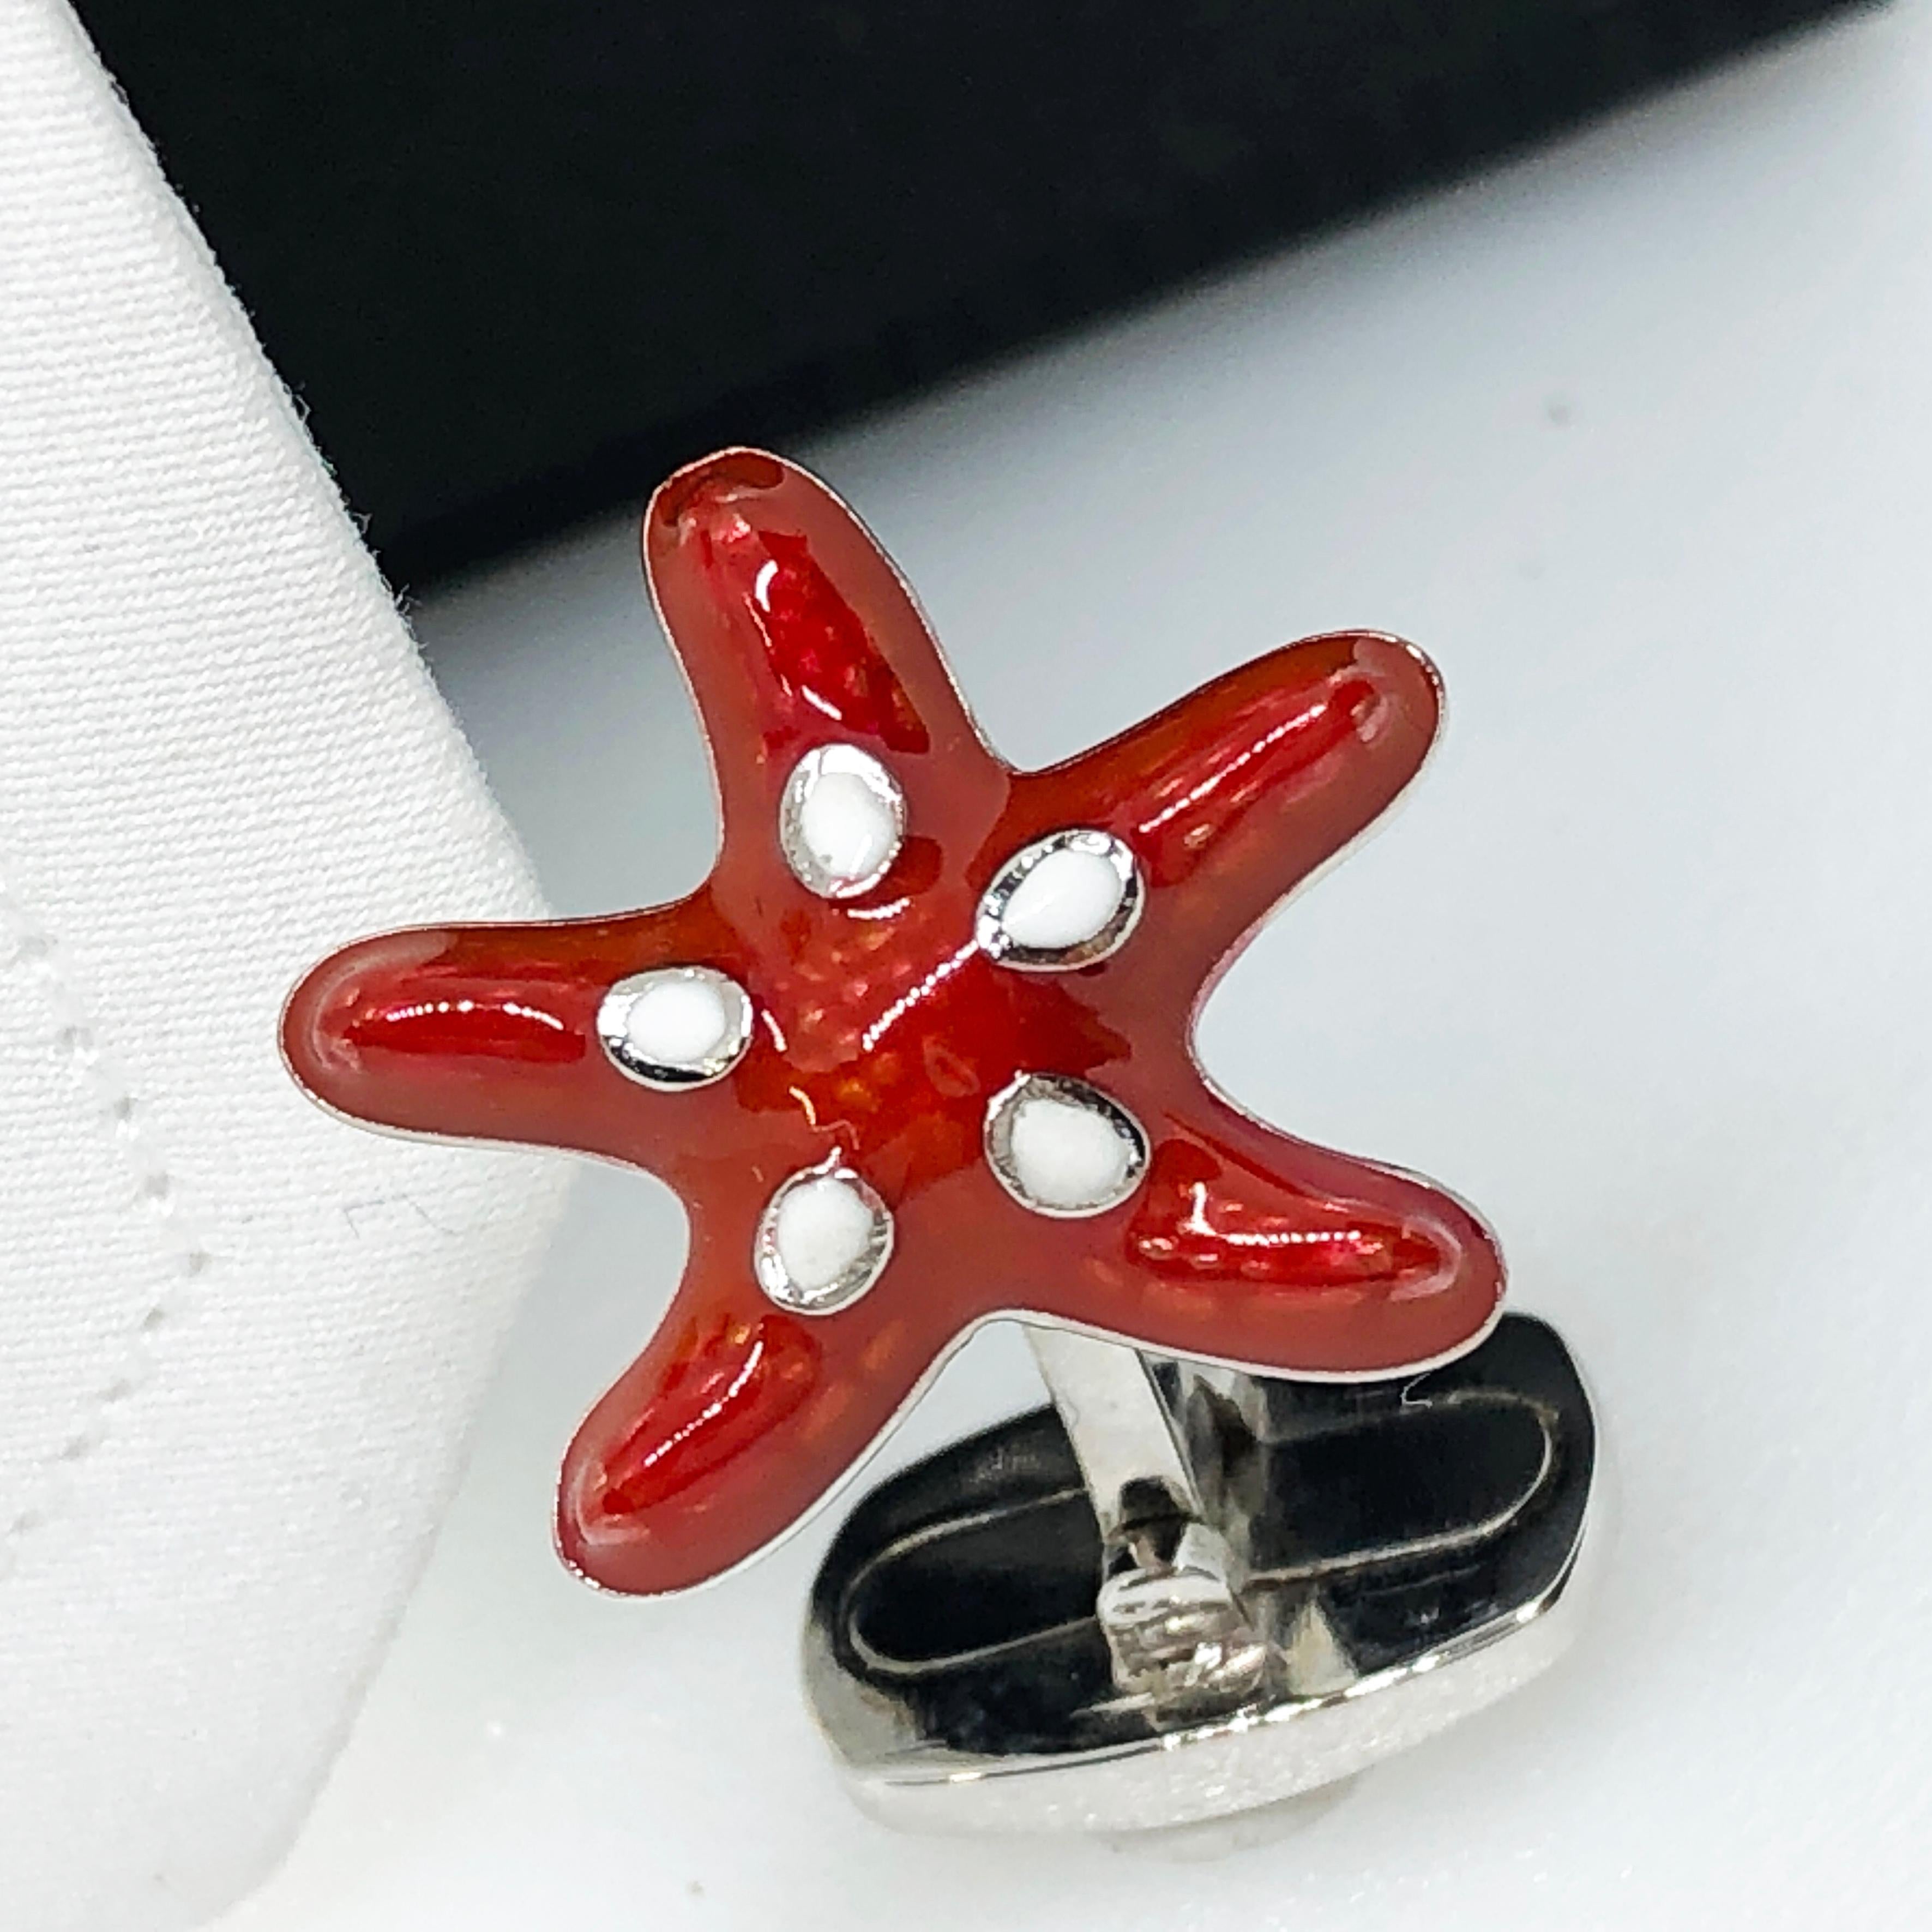 Unique and Chic Red and White Spotted Hand Enamelled Little Starfish Shaped T-Bar Back, Sterling Silver Cufflinks.
In our smart black box.

